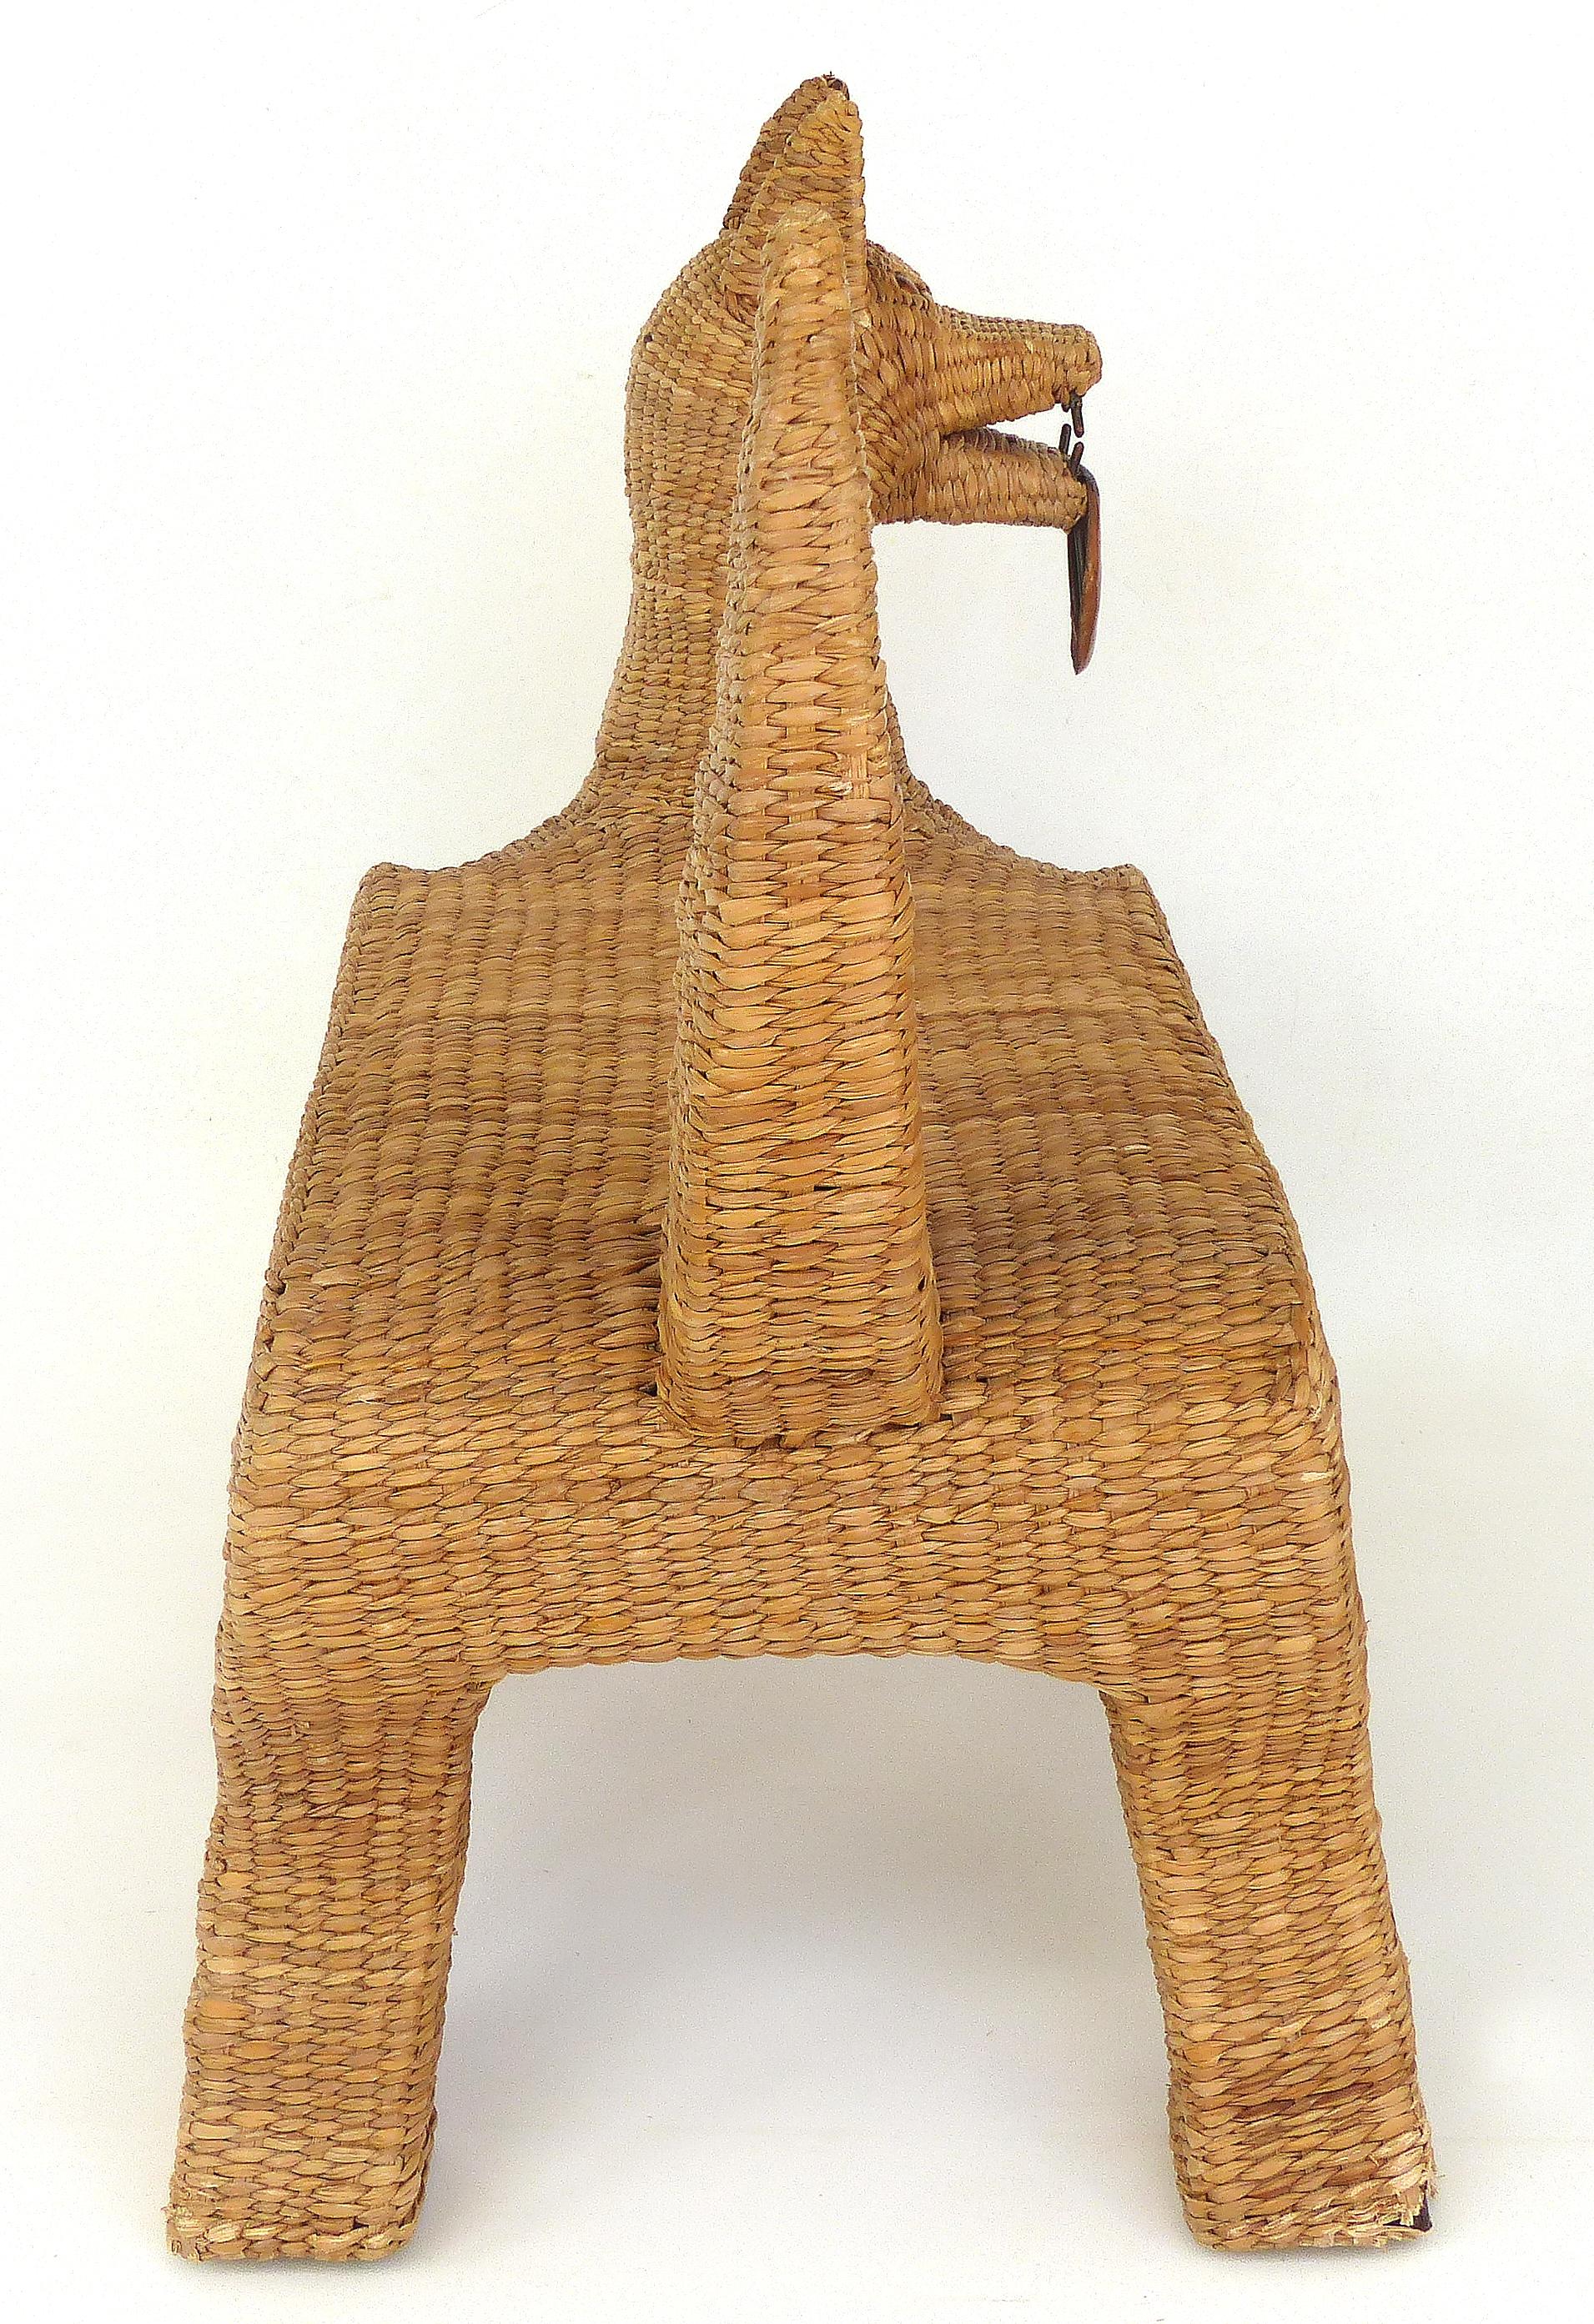 Mario Lopez Torres Coyote Bench, Mid-Century Modern Woven Reed & Copper, Mexico 3